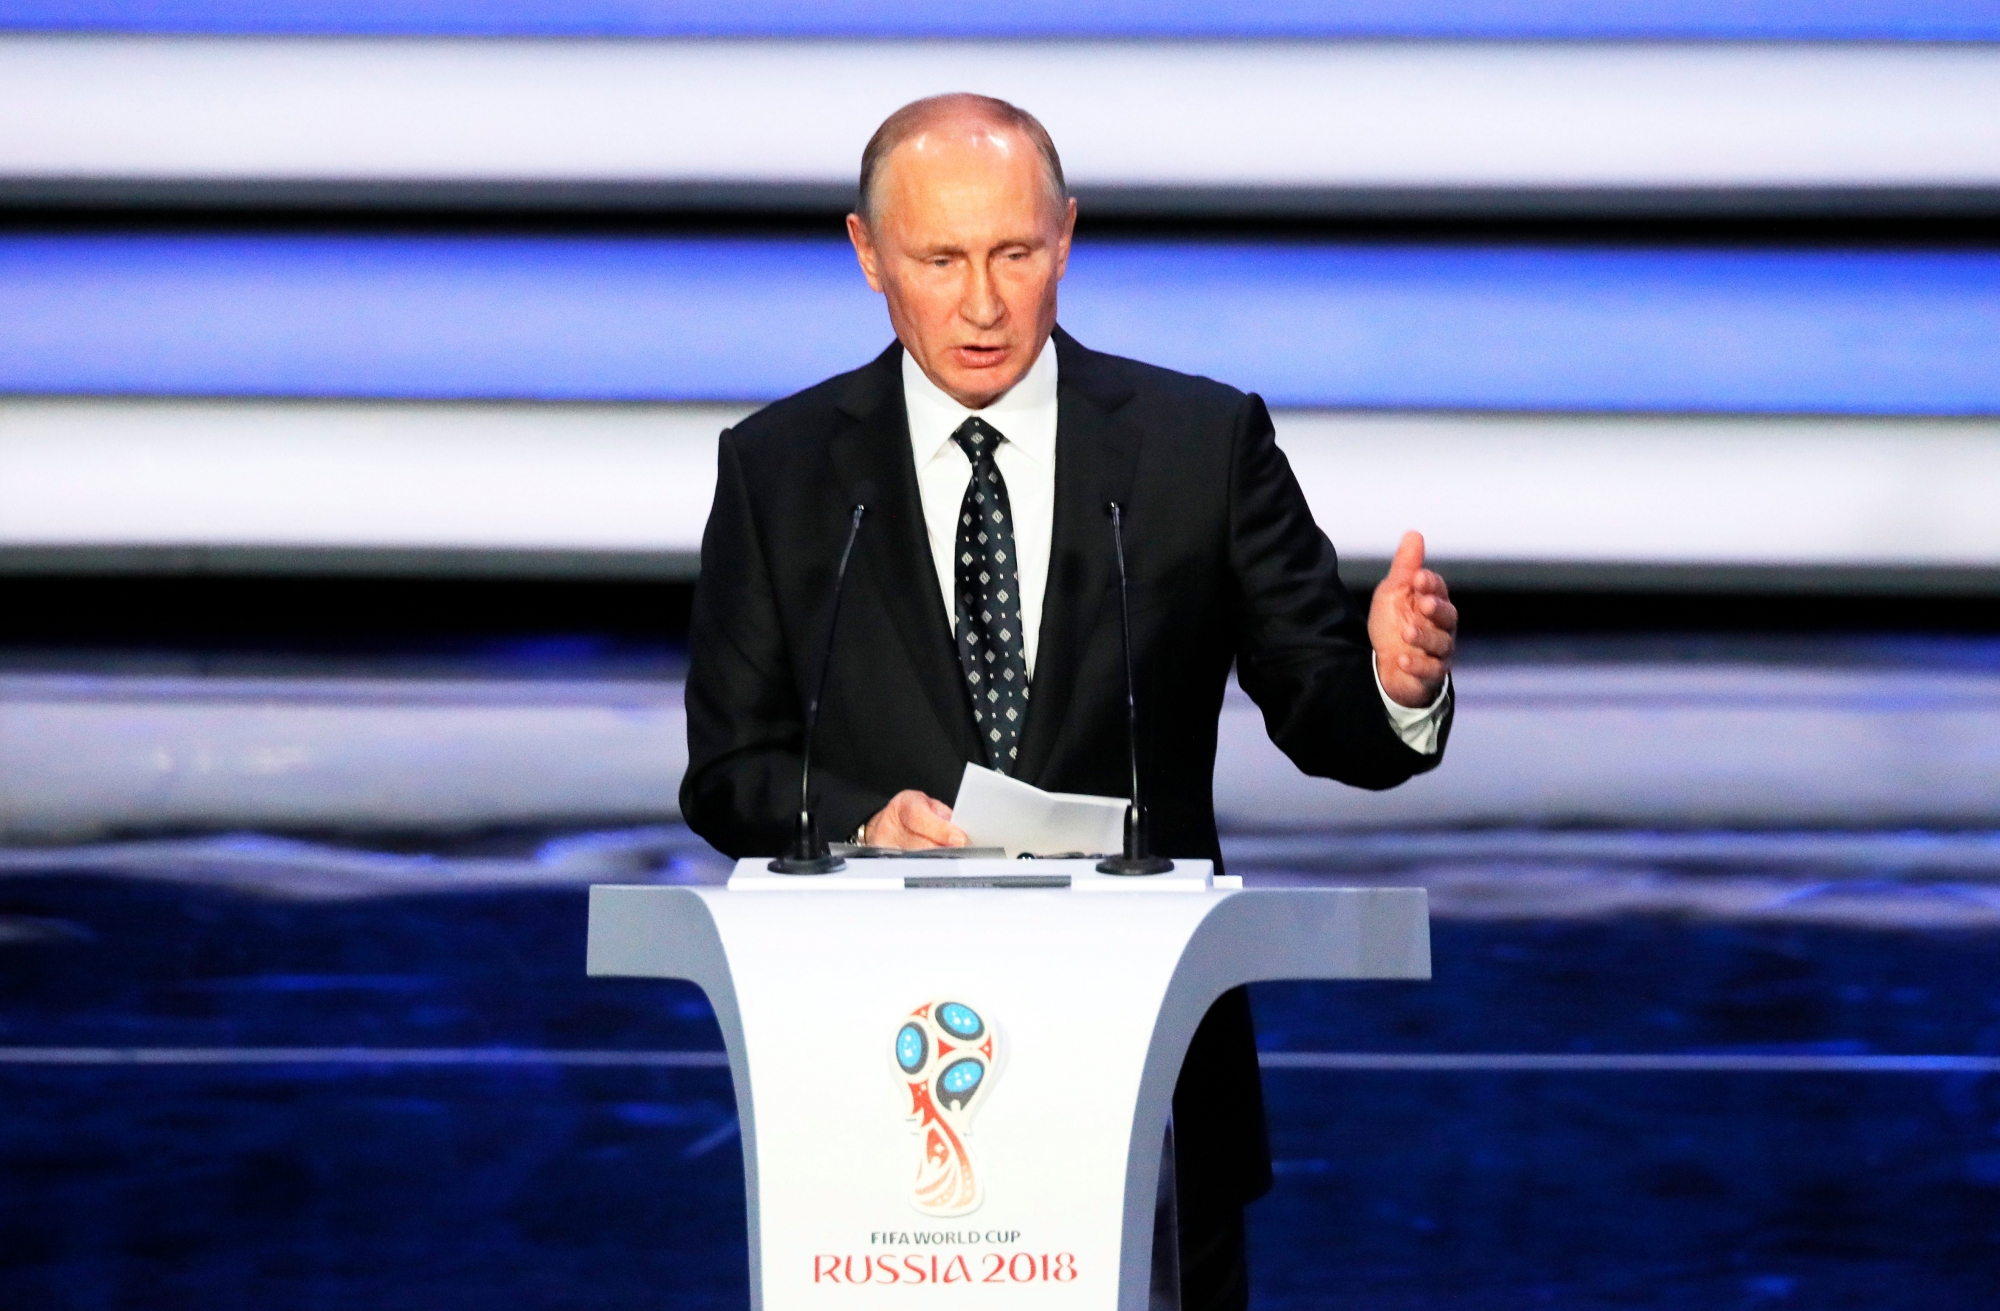 epa06361729 Russian President Vladimir Putin delivers a speech during the Final Draw of the FIFA World Cup 2018 at the State Kremlin Palace in Moscow, Russia, 01 December 2017. The FIFA World Cup 2018 will take place from 14 June until 15 July 2018 in Russia.  EPA/YURI KOCHETKOV RUSSIA SOCCER DRAW FIFA WORLD CUP 2018